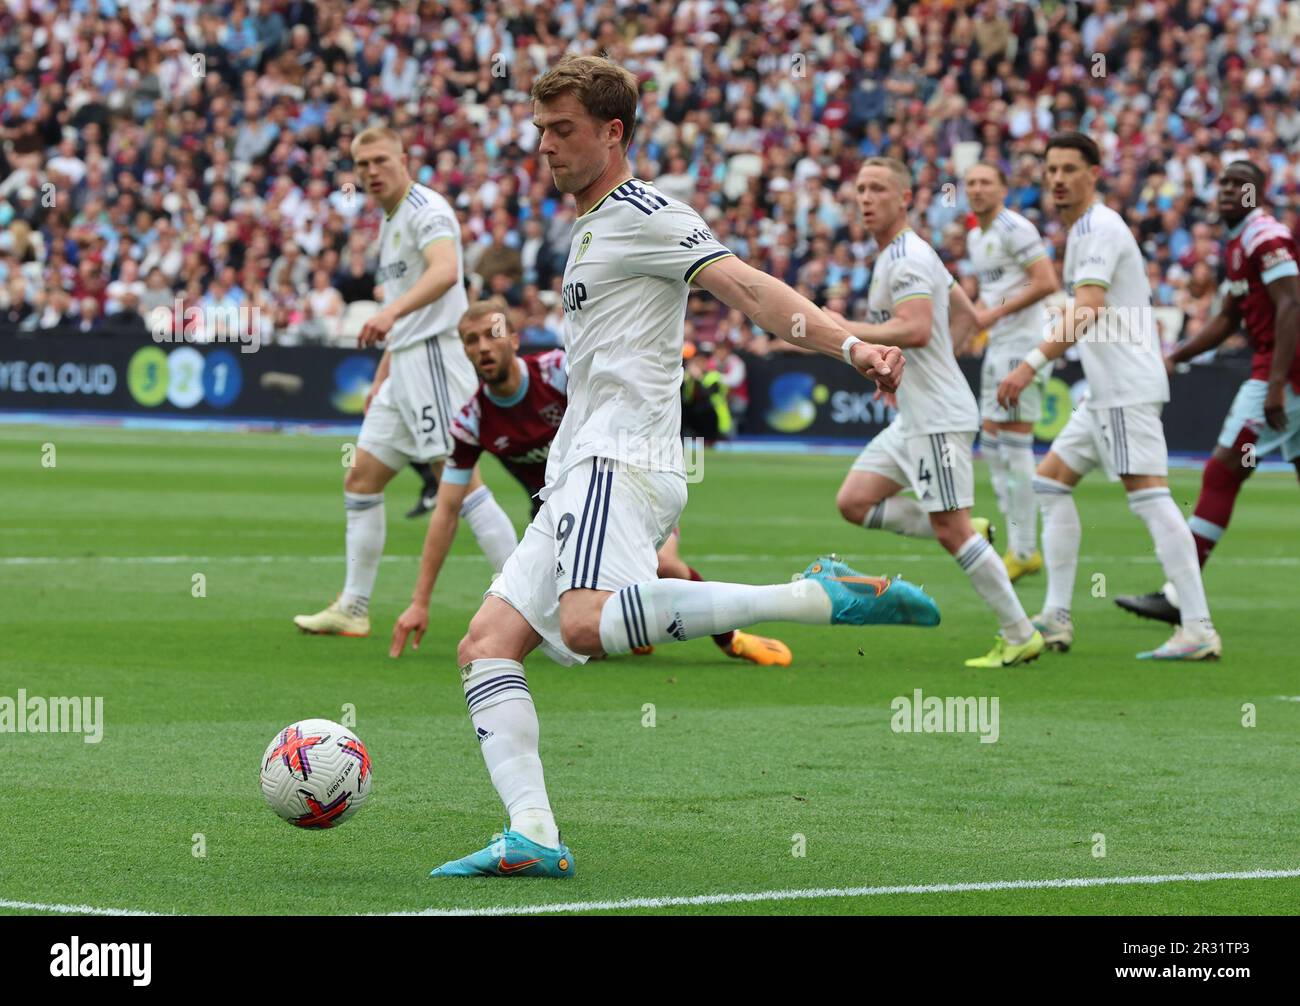 Patrick Bamford of Leeds United in action during English Premier League soccer match between West Ham United against Leeds United at London stadium, L Stock Photo